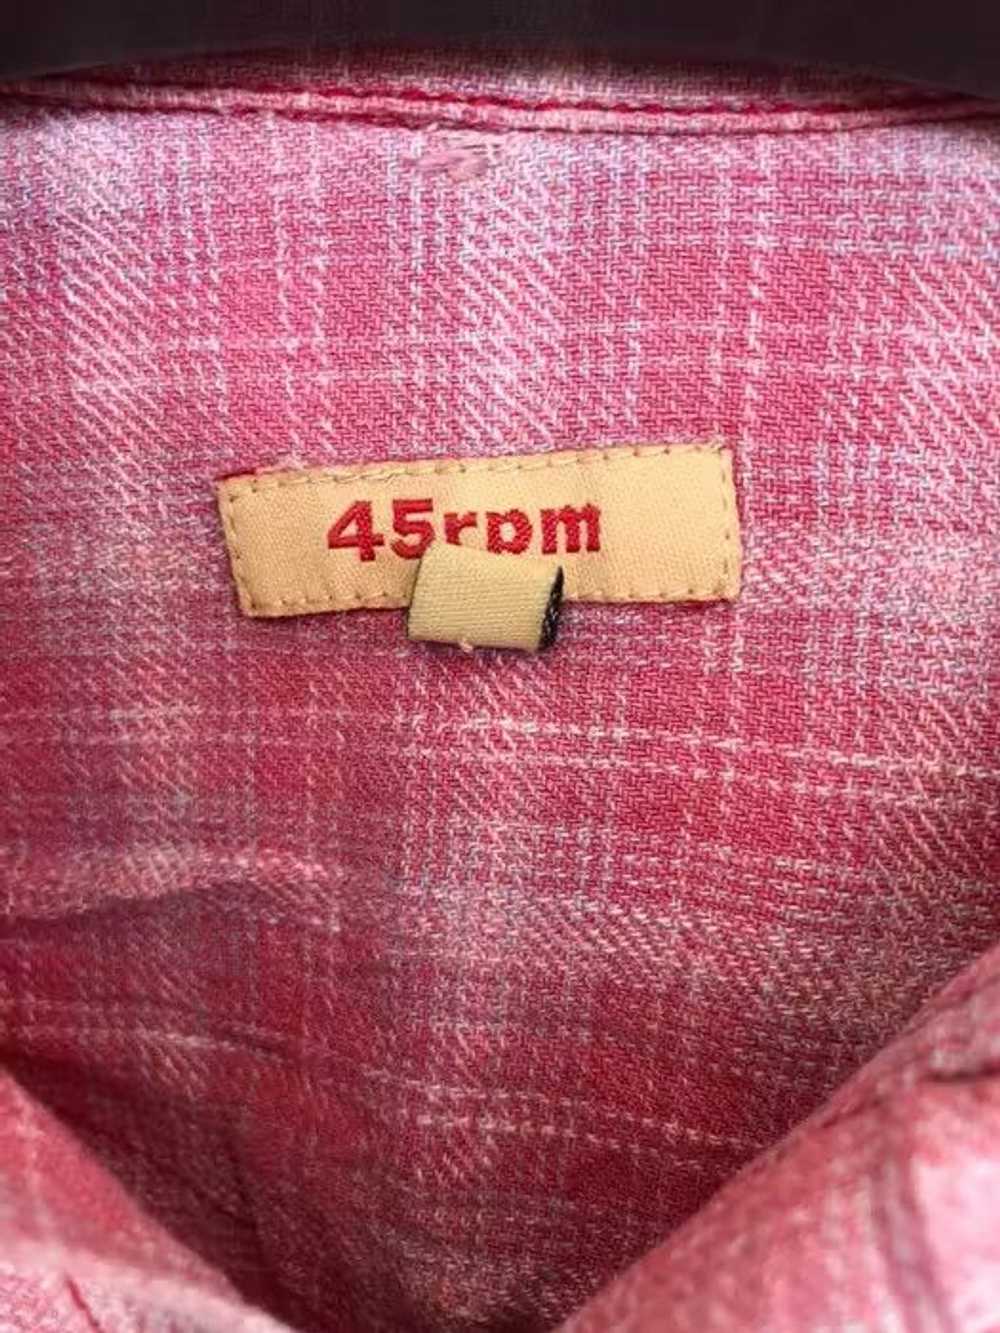 45rpm × Flannel × Japanese Brand 45 Rpm Japan But… - image 5